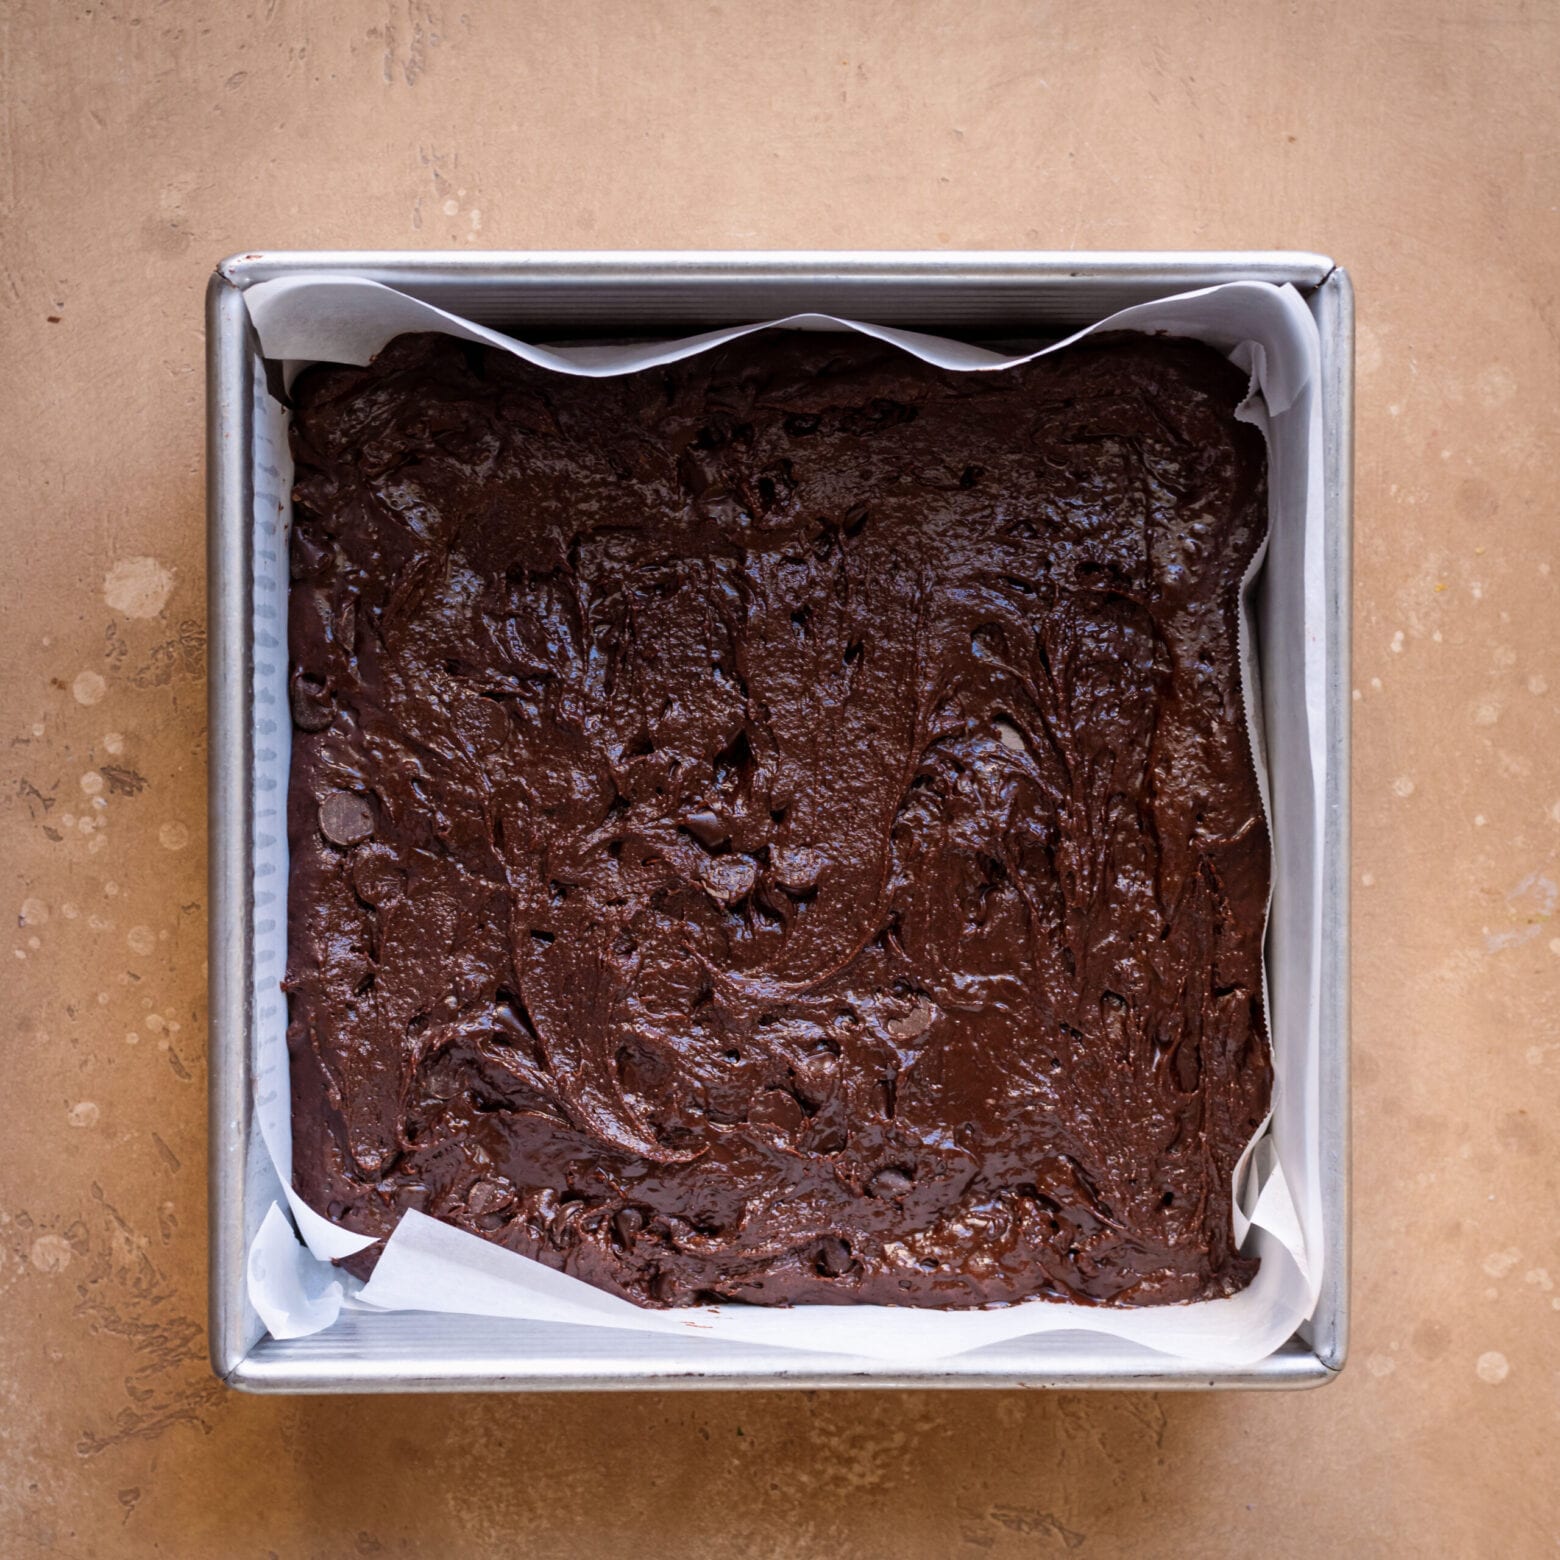 brownie batter in 8x8 baking pan lined with parchment paper